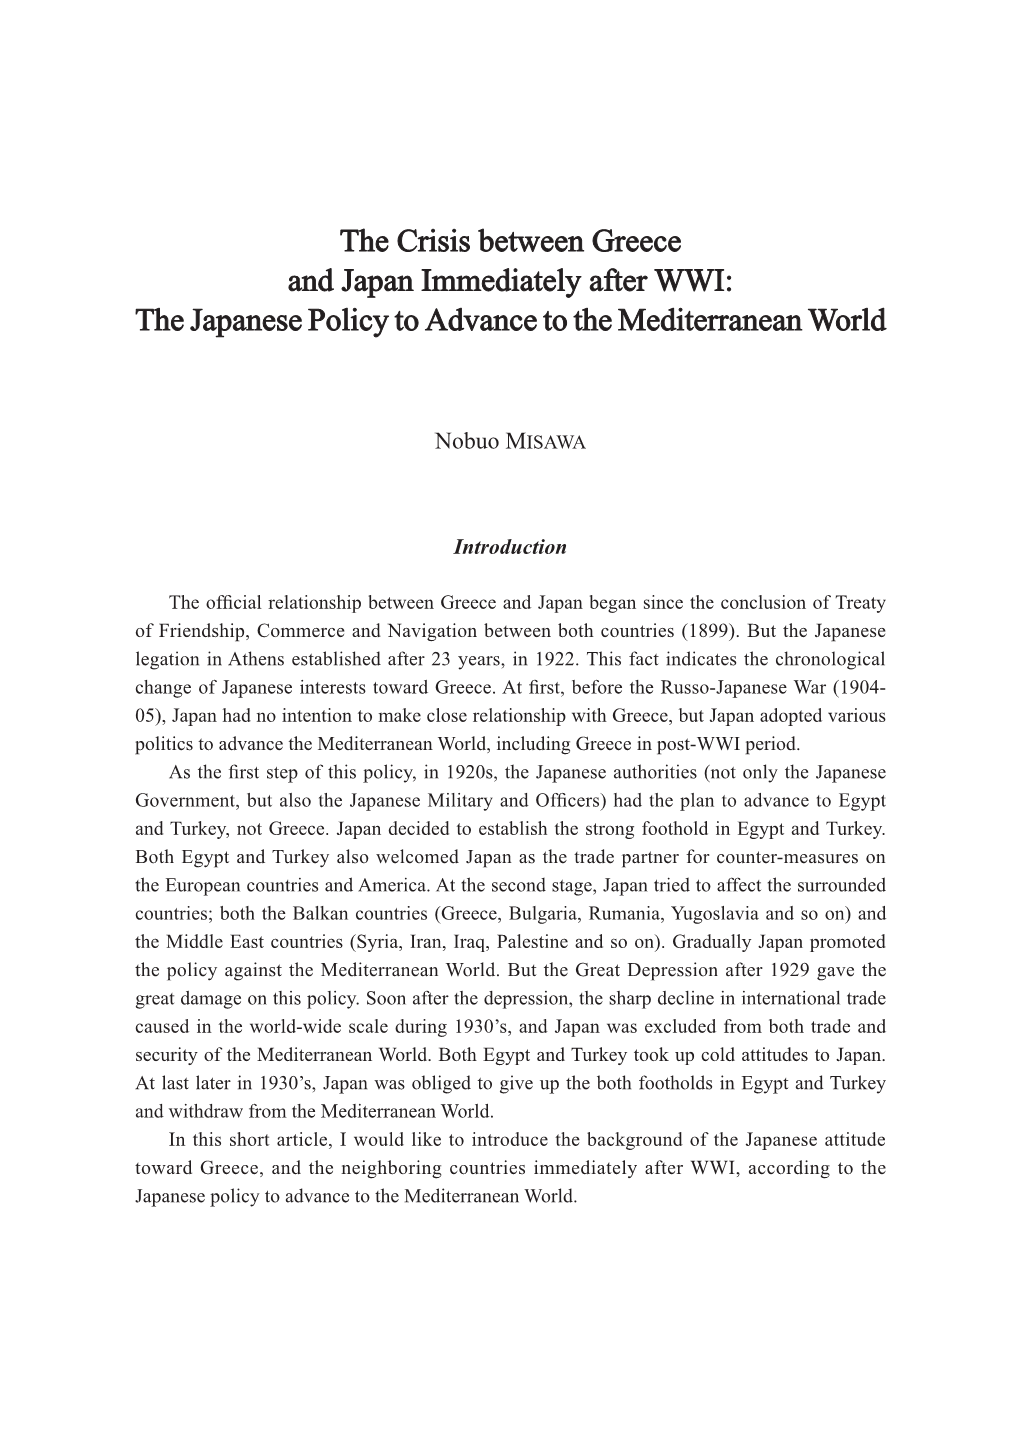 The Crisis Between Greece and Japan Immediately After WWI: the Japanese Policy to Advance to the Mediterranean World